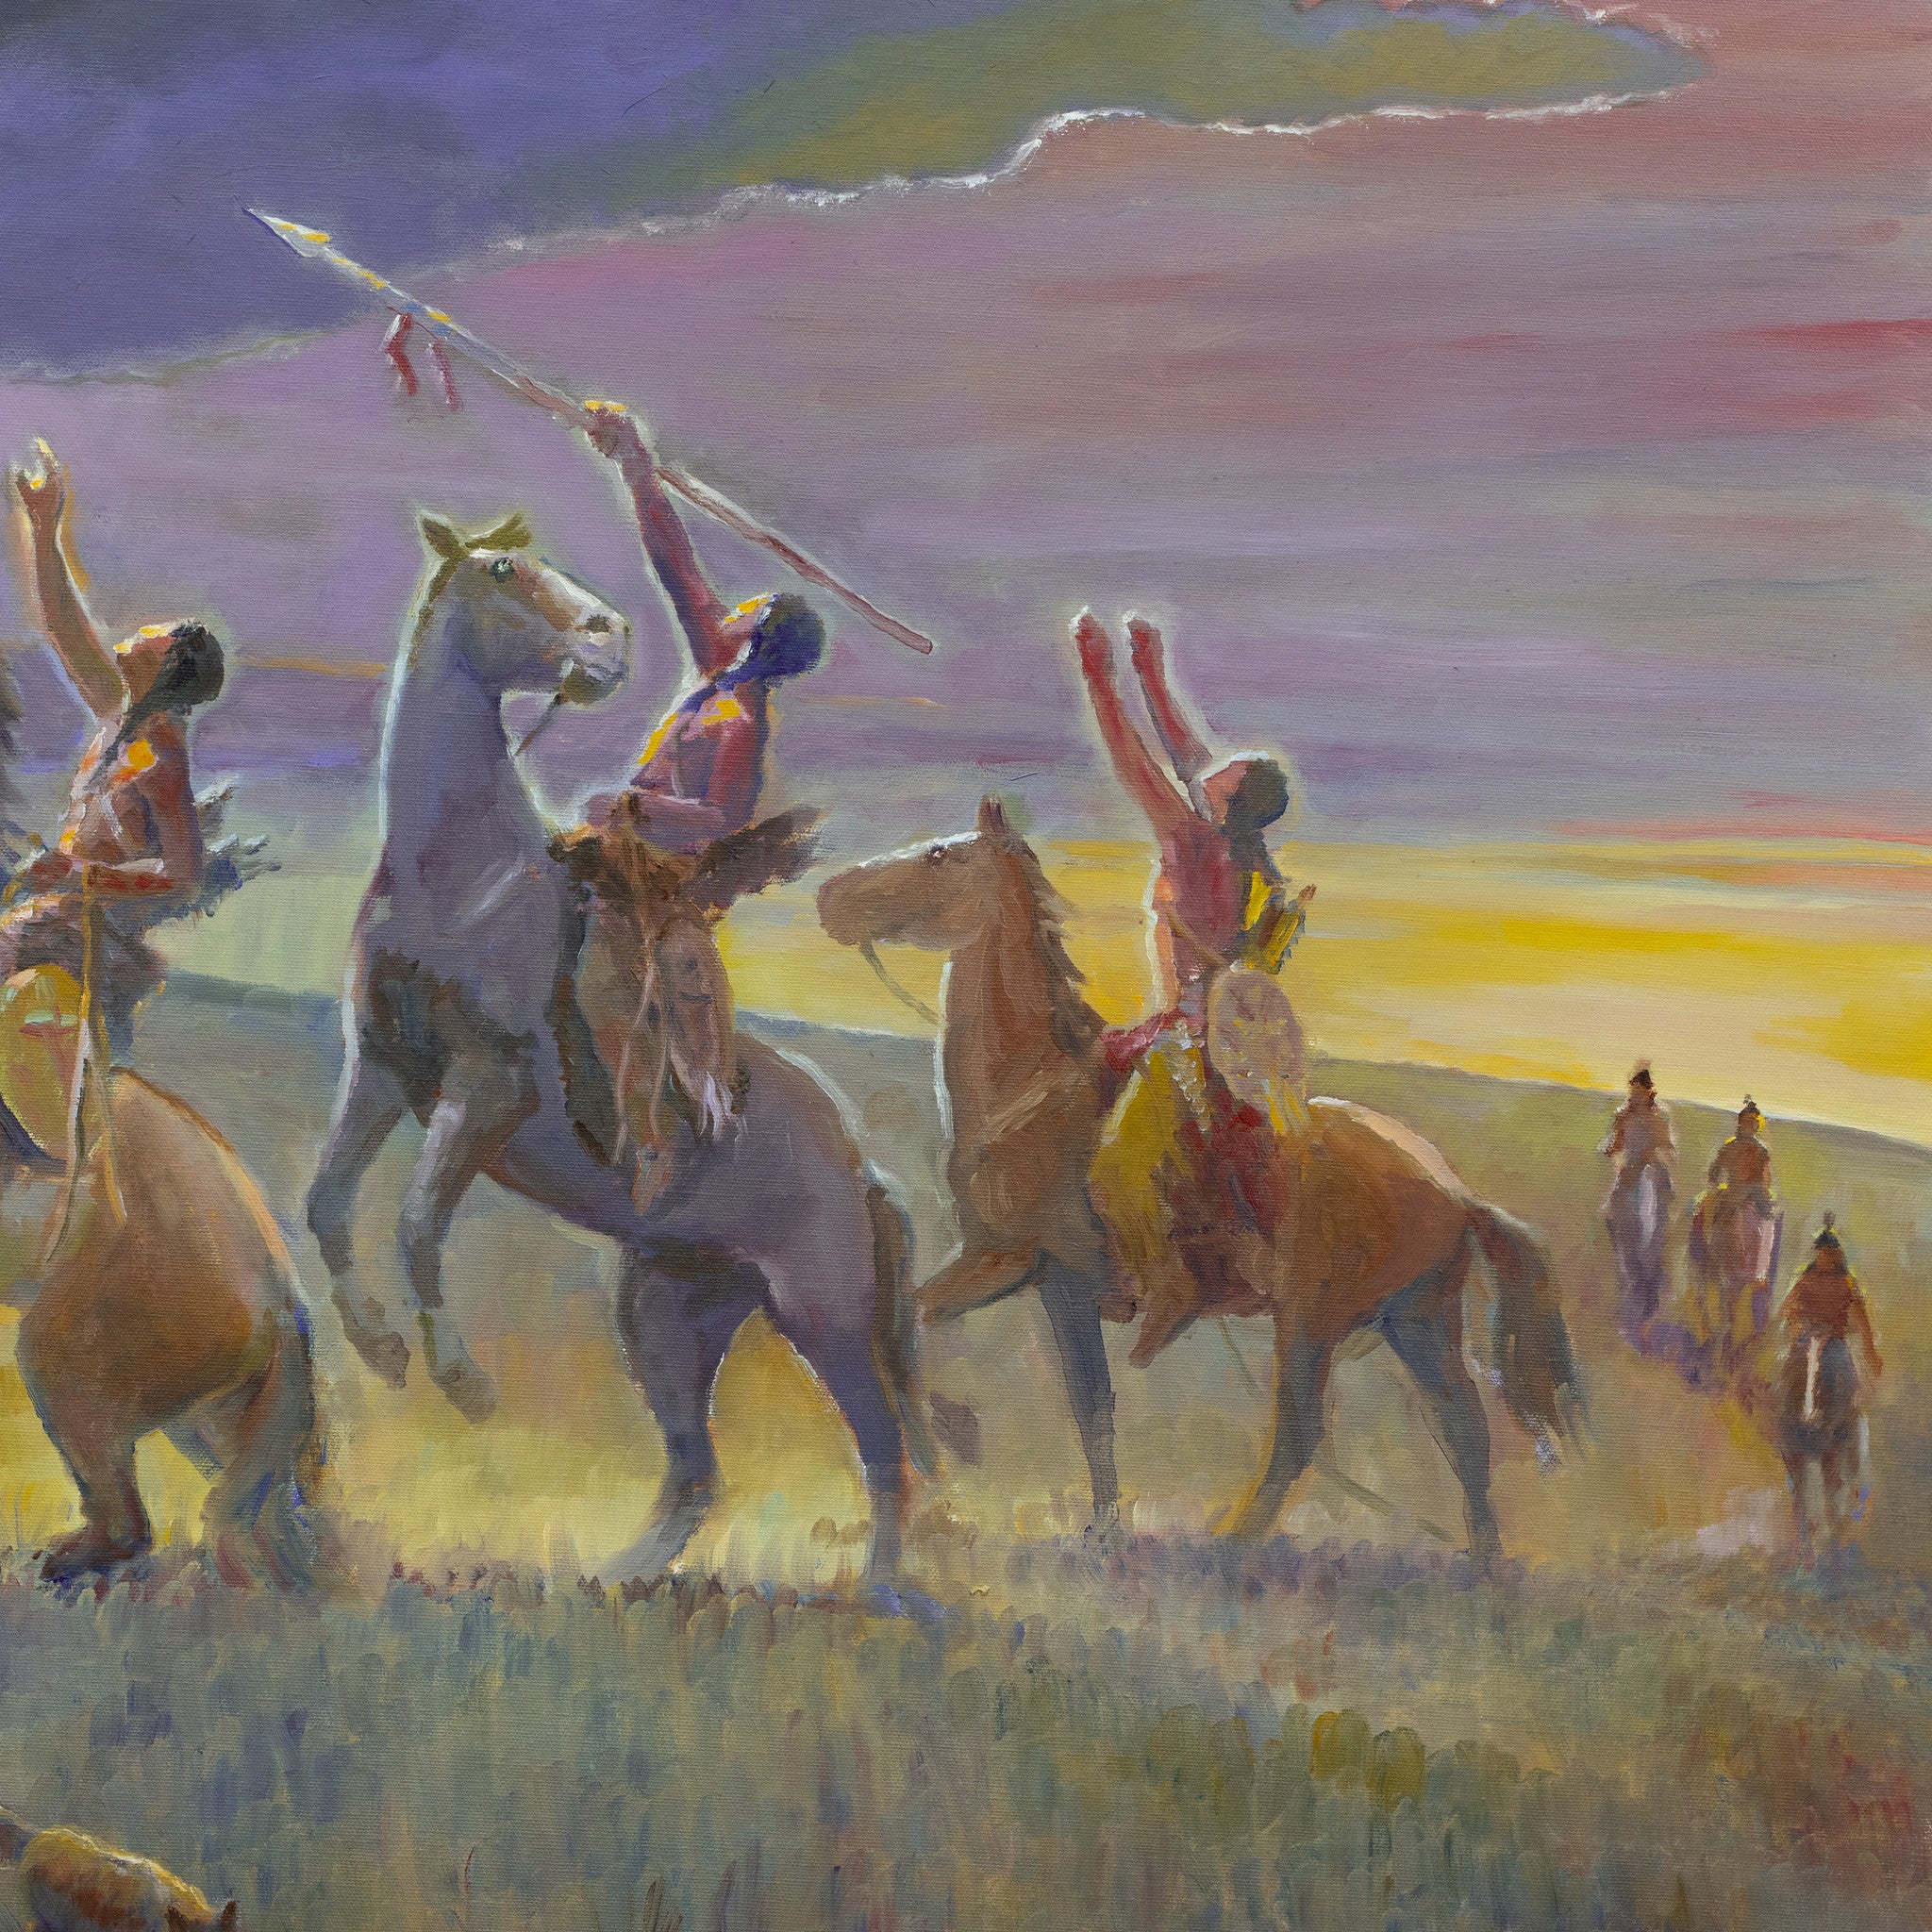 Praise to the Great Spirit by Jim Carkhuff